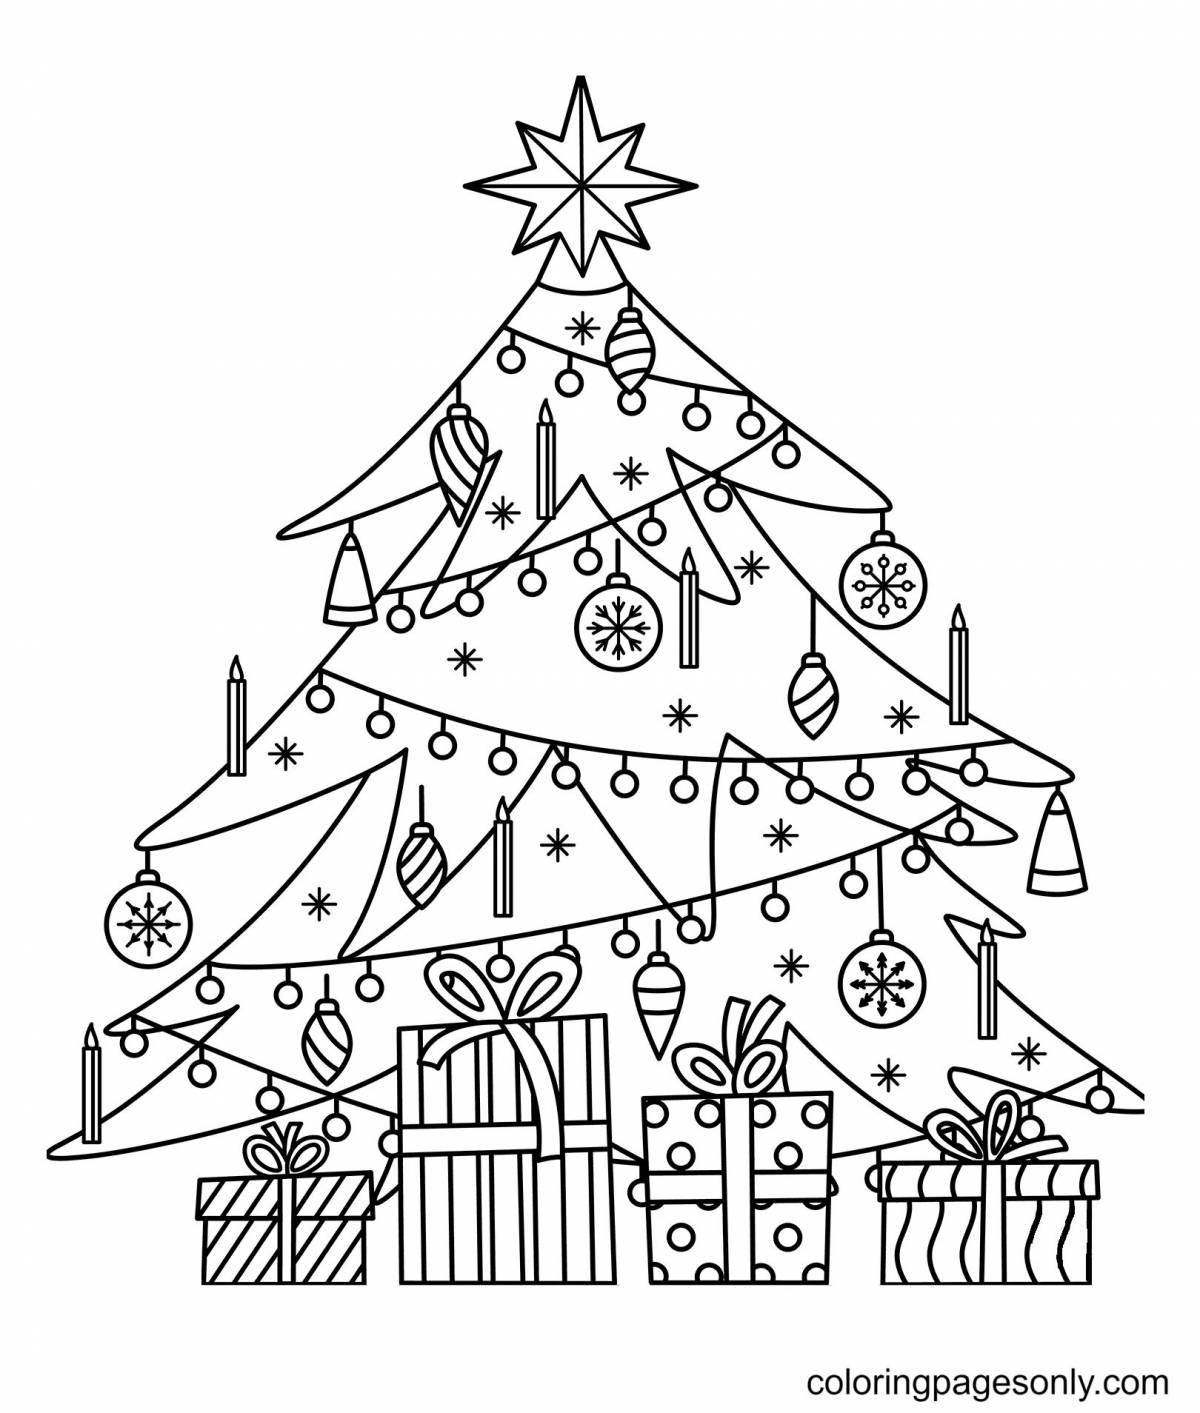 Live Christmas tree coloring book